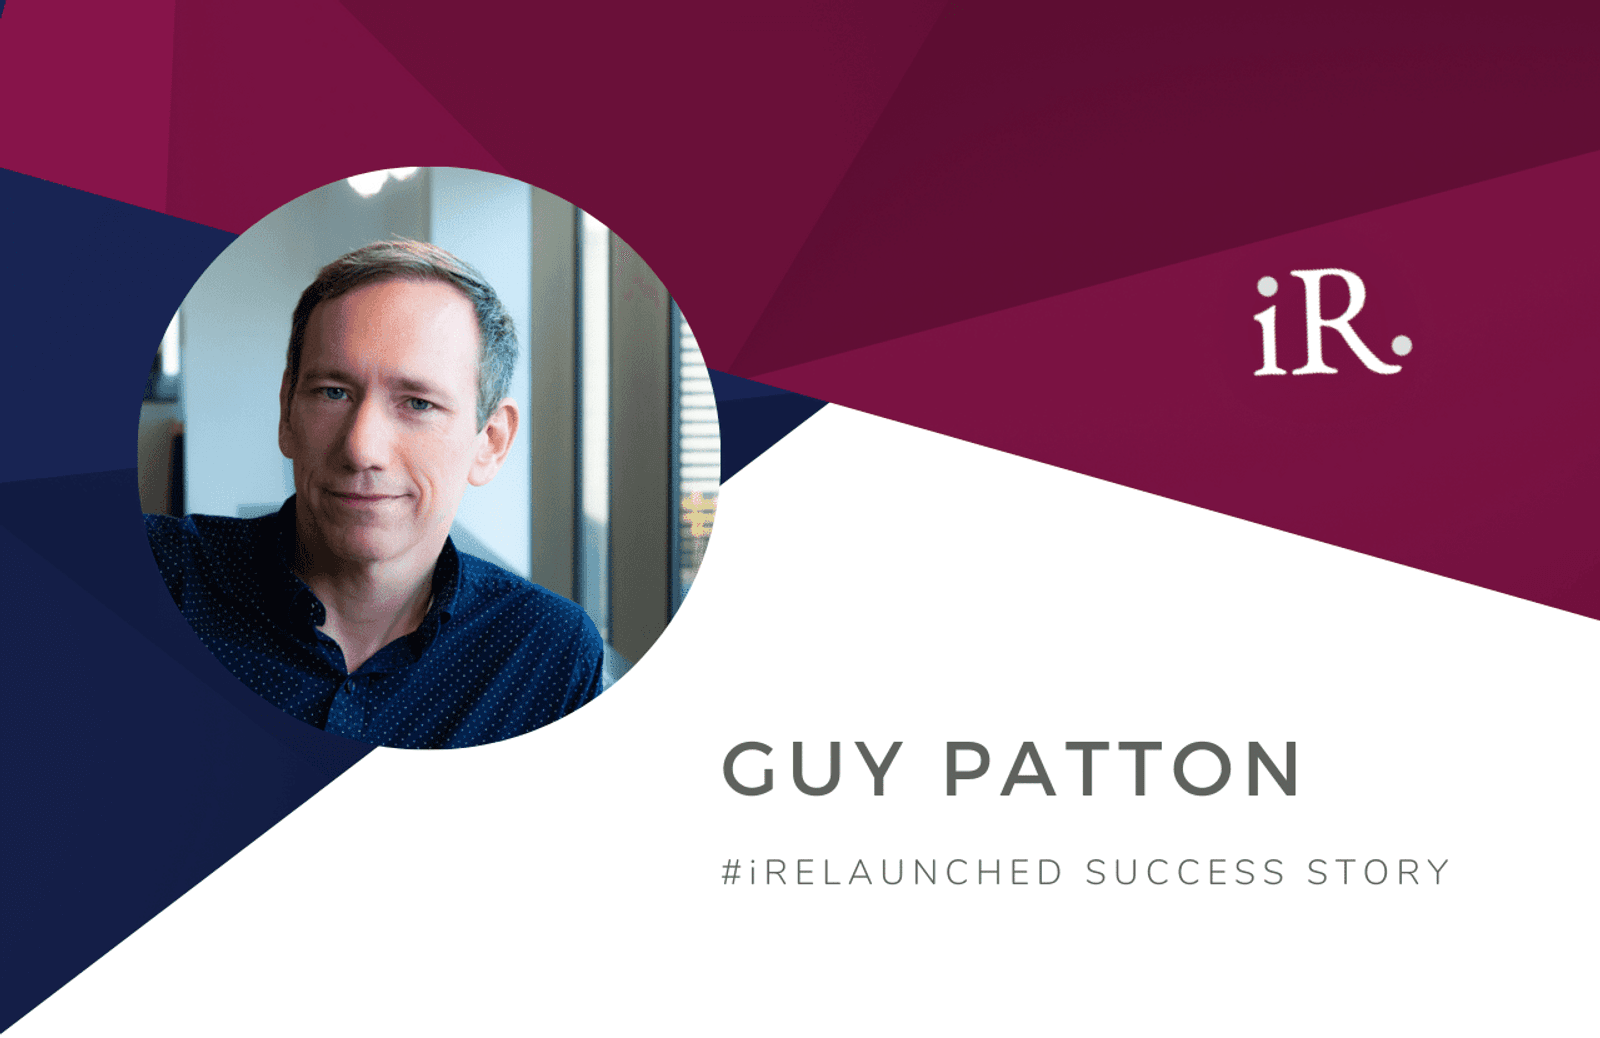 Guy Patton's headshot and the text #iRelaunched Success Story along with the iRelaunch logo.  A navy and maroon geometric textured background intersect behind Guy's headshot.